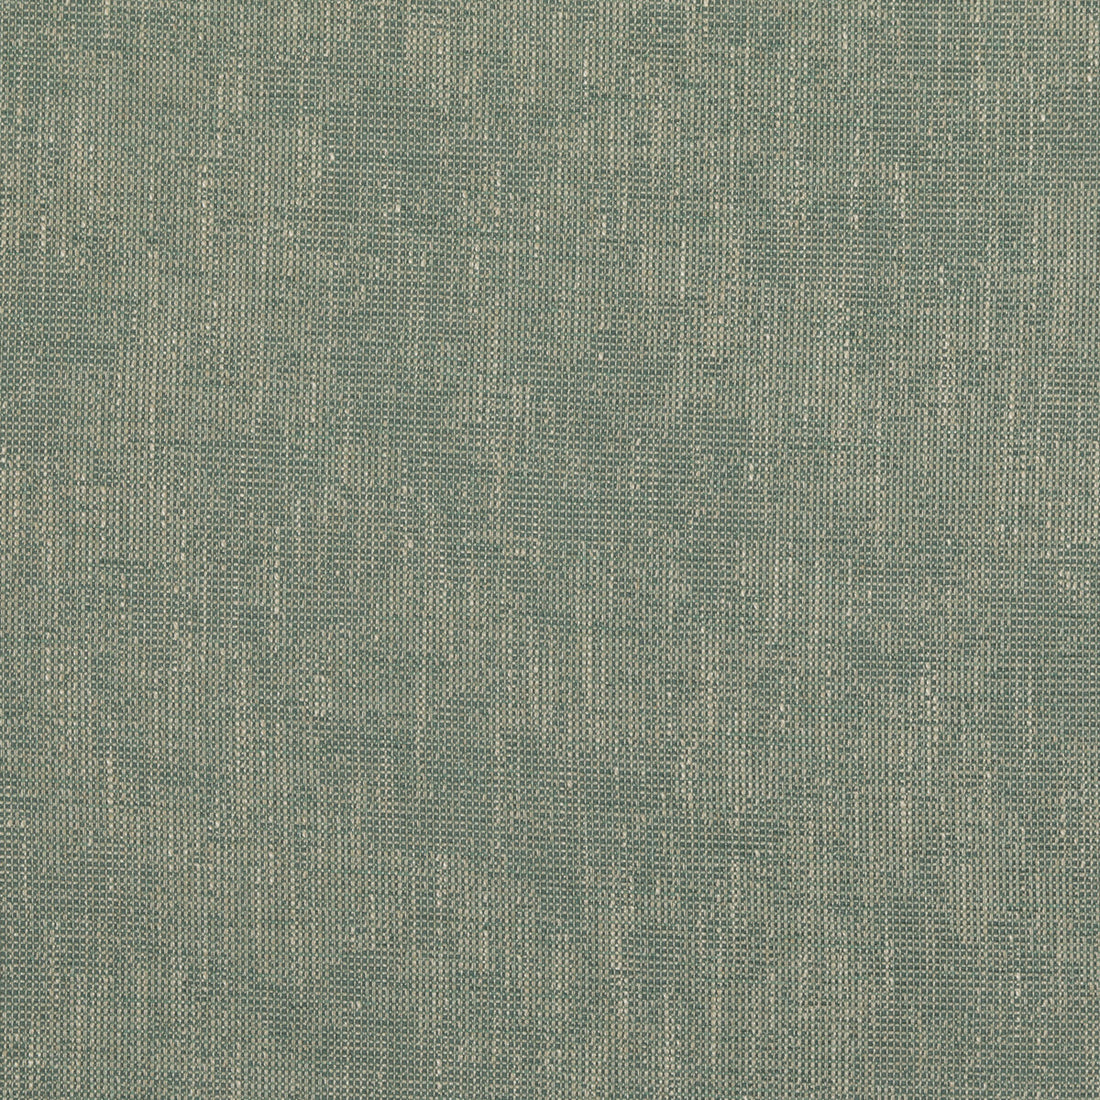 Bower fabric in aqua color - pattern PF50489.725.0 - by Baker Lifestyle in the Block Weaves collection